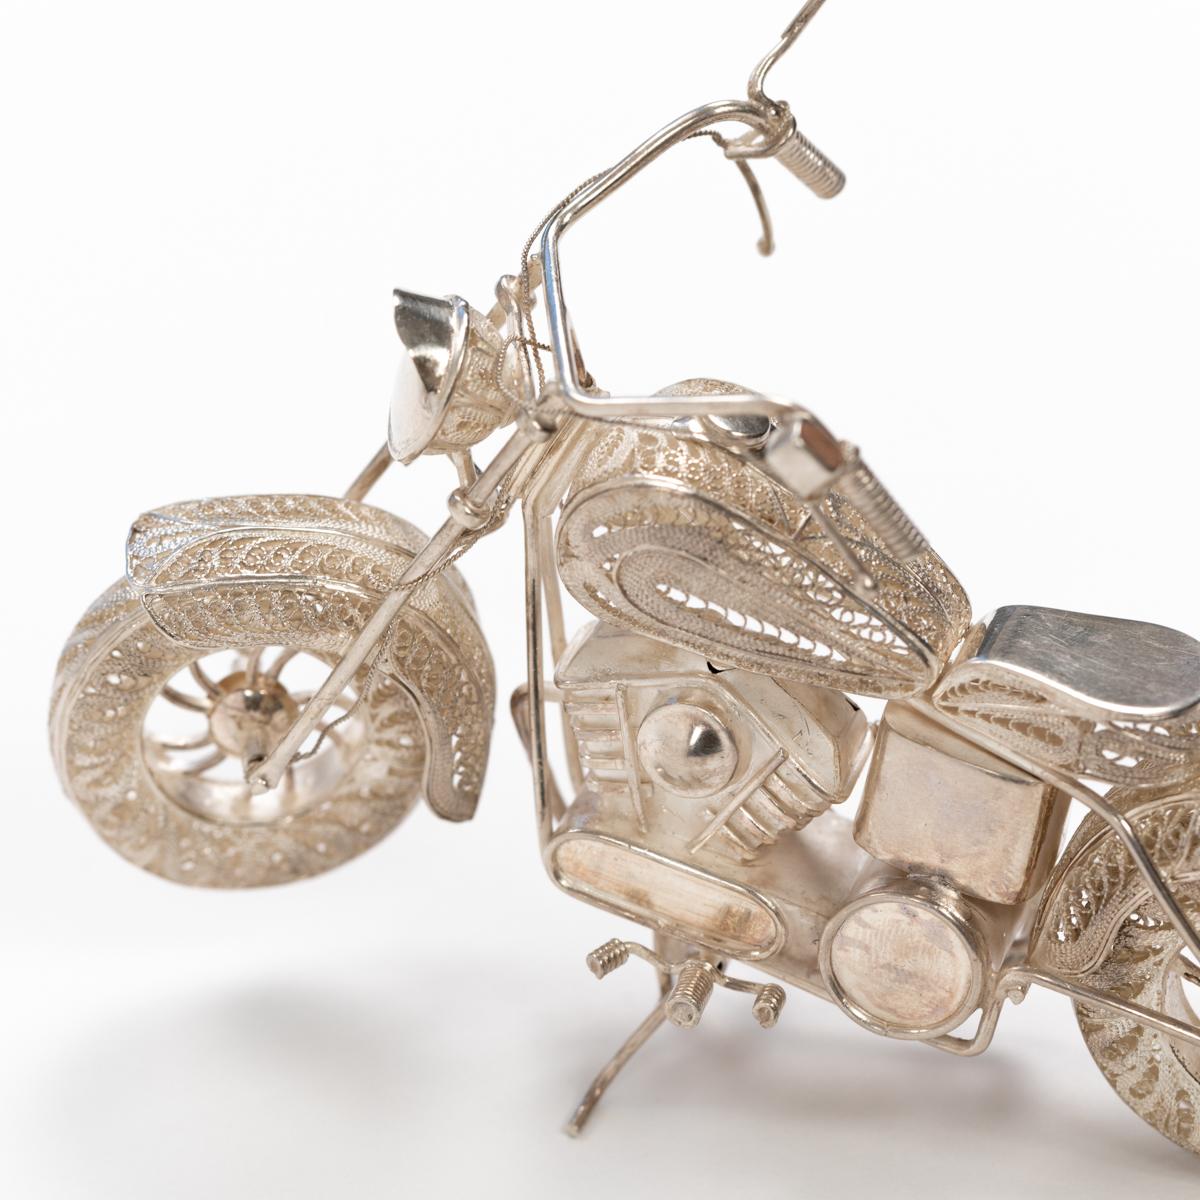 Harley Davidson Sculpture 925 Silver Handcrafted Filigree Technique Germany 2005 6